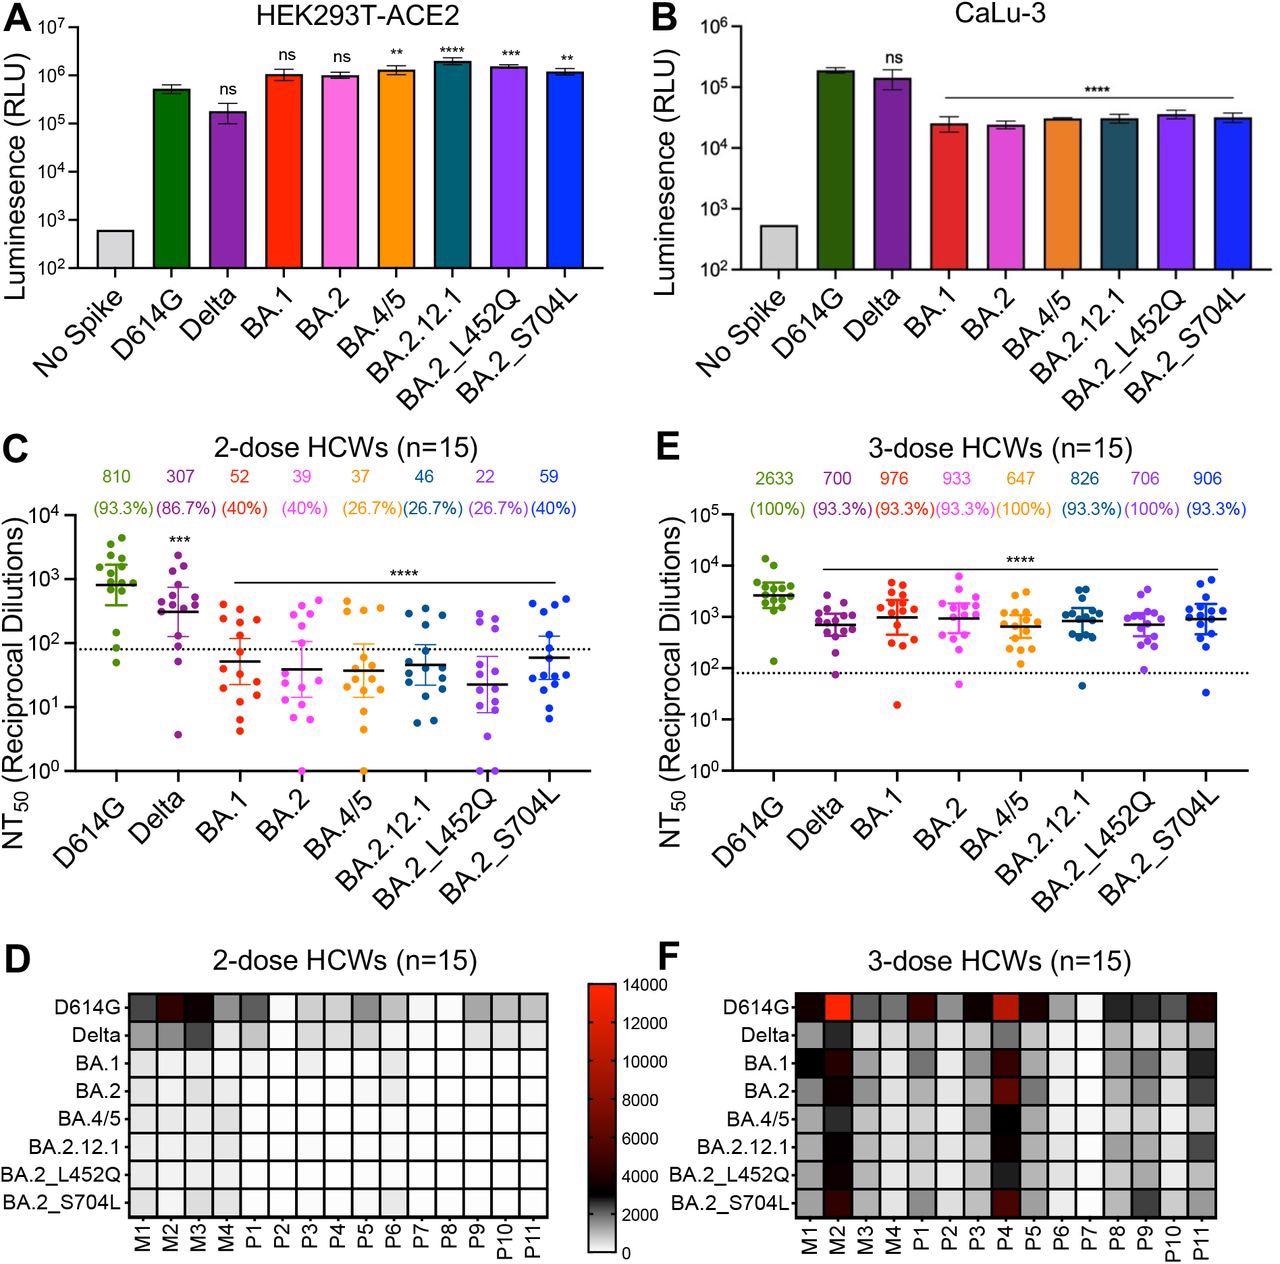 BA.4 / 5 and BA.2.12.1 subvariants exhibit stronger immune escape than BA.1 and BA.2.  (A) Infectivity of pseudotyped viruses in HEK293T cells stably expressing ACE2 (HEK293T-ACE2).  (B) Infectivity of pseudotyped lentivirus in human lung epithelia-derived CaLu-3 cells.  Bars in (A) and (B) represent means ± standard deviation, and significance is determined by one-way repeated measures ANOVA with Bonferroni's multiple testing correction.  Results of at least 3 independent experiments are averaged and shown.  (C) Sera from 15 HCWs collected 3-4 weeks after second mRNA vaccine dose was used to neutralize pseudotyped virus, and the resulting geometric means of the 50% neutralization titers (NT50) are displayed at the top of the graph along with the percent of individuals with NT50 values ​​above the limit of detection (NT50 = 80; dotted line).  (D) A heat map showing patient / vaccinee NT50 values ​​against each variant for the 2-dose HCW sera.  (E) Sera from 15 HCWs following homologous mRNA booster vaccination were assessed for nAb titers.  Bars in (C) and (E) represent geometric mean ± 95% confidence interval, and significance relative to D614G is determined by one-way repeated measures ANOVA with Bonferroni's multiple testing correction.  (F) A heat map showing patient / vaccinee NT50 values ​​against each variant for the 3-dose HCW sera.  Patient / vaccinee numbers are identified as “P” for Pfizer / BioNTech BNT162b2 vaccinated / boosted HCW, “M” for Moderna mRNA-1273 vaccinated / boosted HCW.  Throughout, p-values ​​are represented as ** p <0.01, *** p <0.001, **** p <0.0001, ns, not significant.